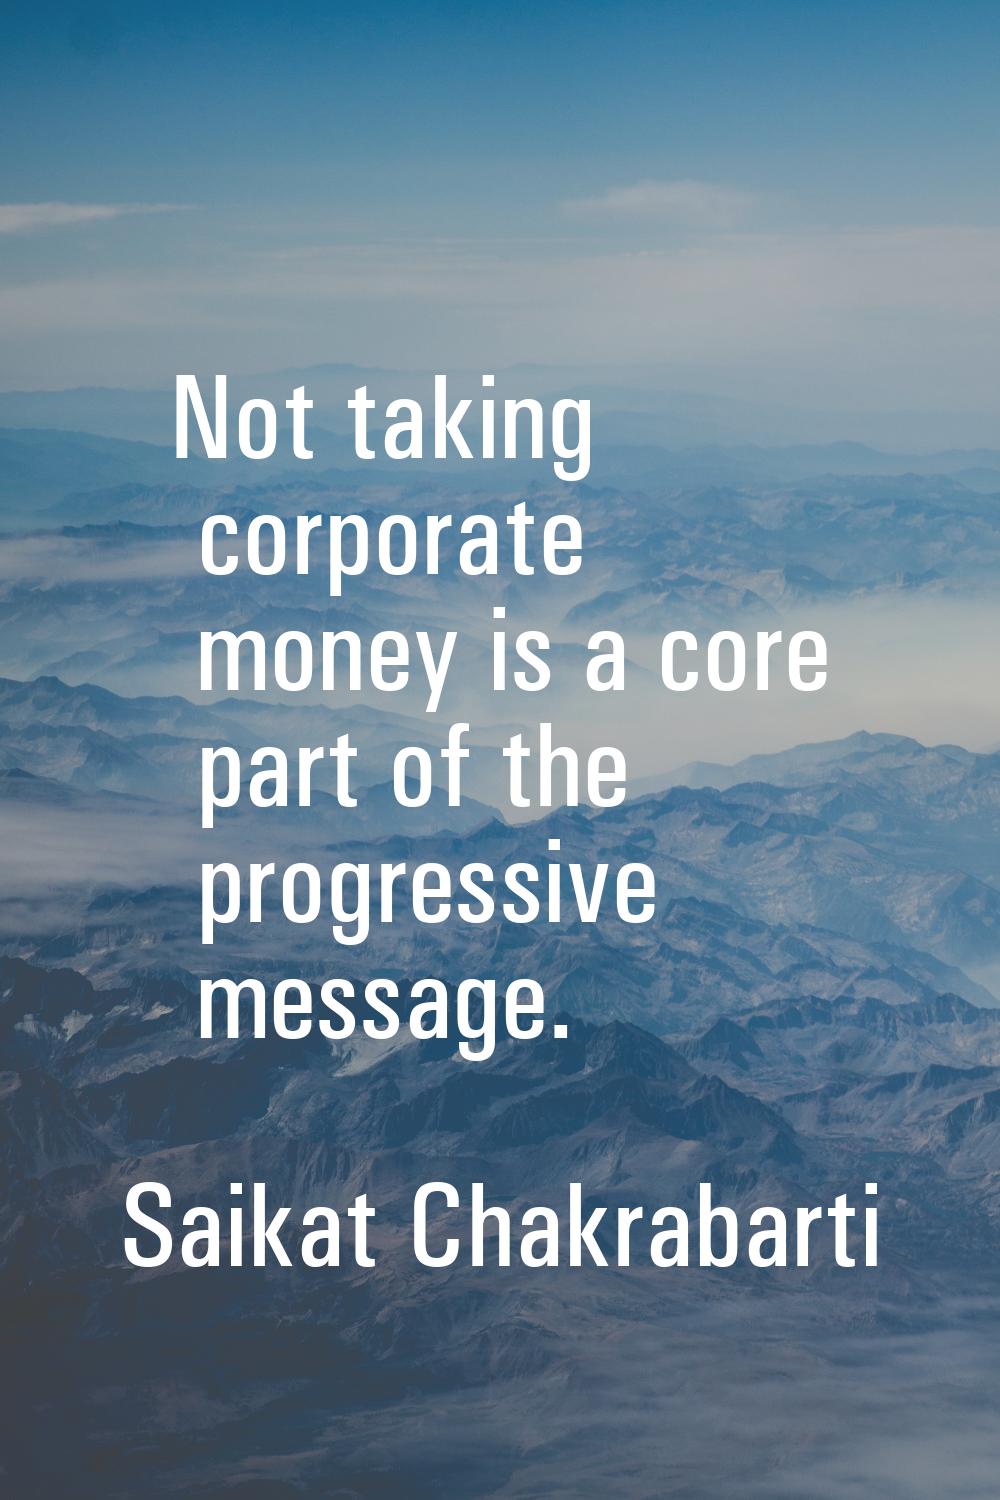 Not taking corporate money is a core part of the progressive message.